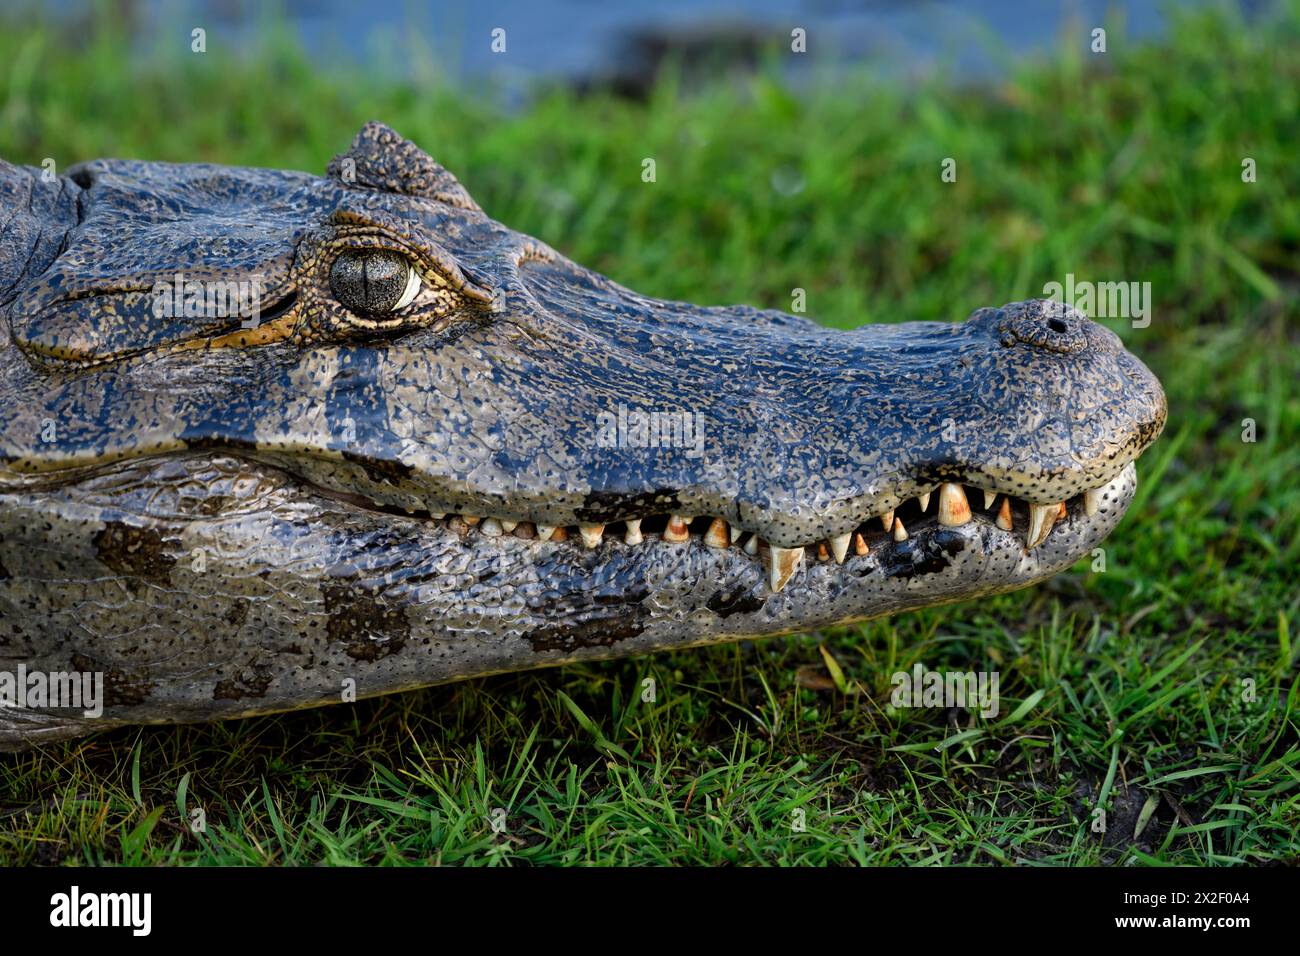 Zoologie, Reptil (Reptilia), brauner Kaiman (Caiman yacare oder Caiman crocodilus yacara), ADDITIONAL-RIGHTS-CLEARANCE-INFO-NOT-AVAILABLE Stockfoto